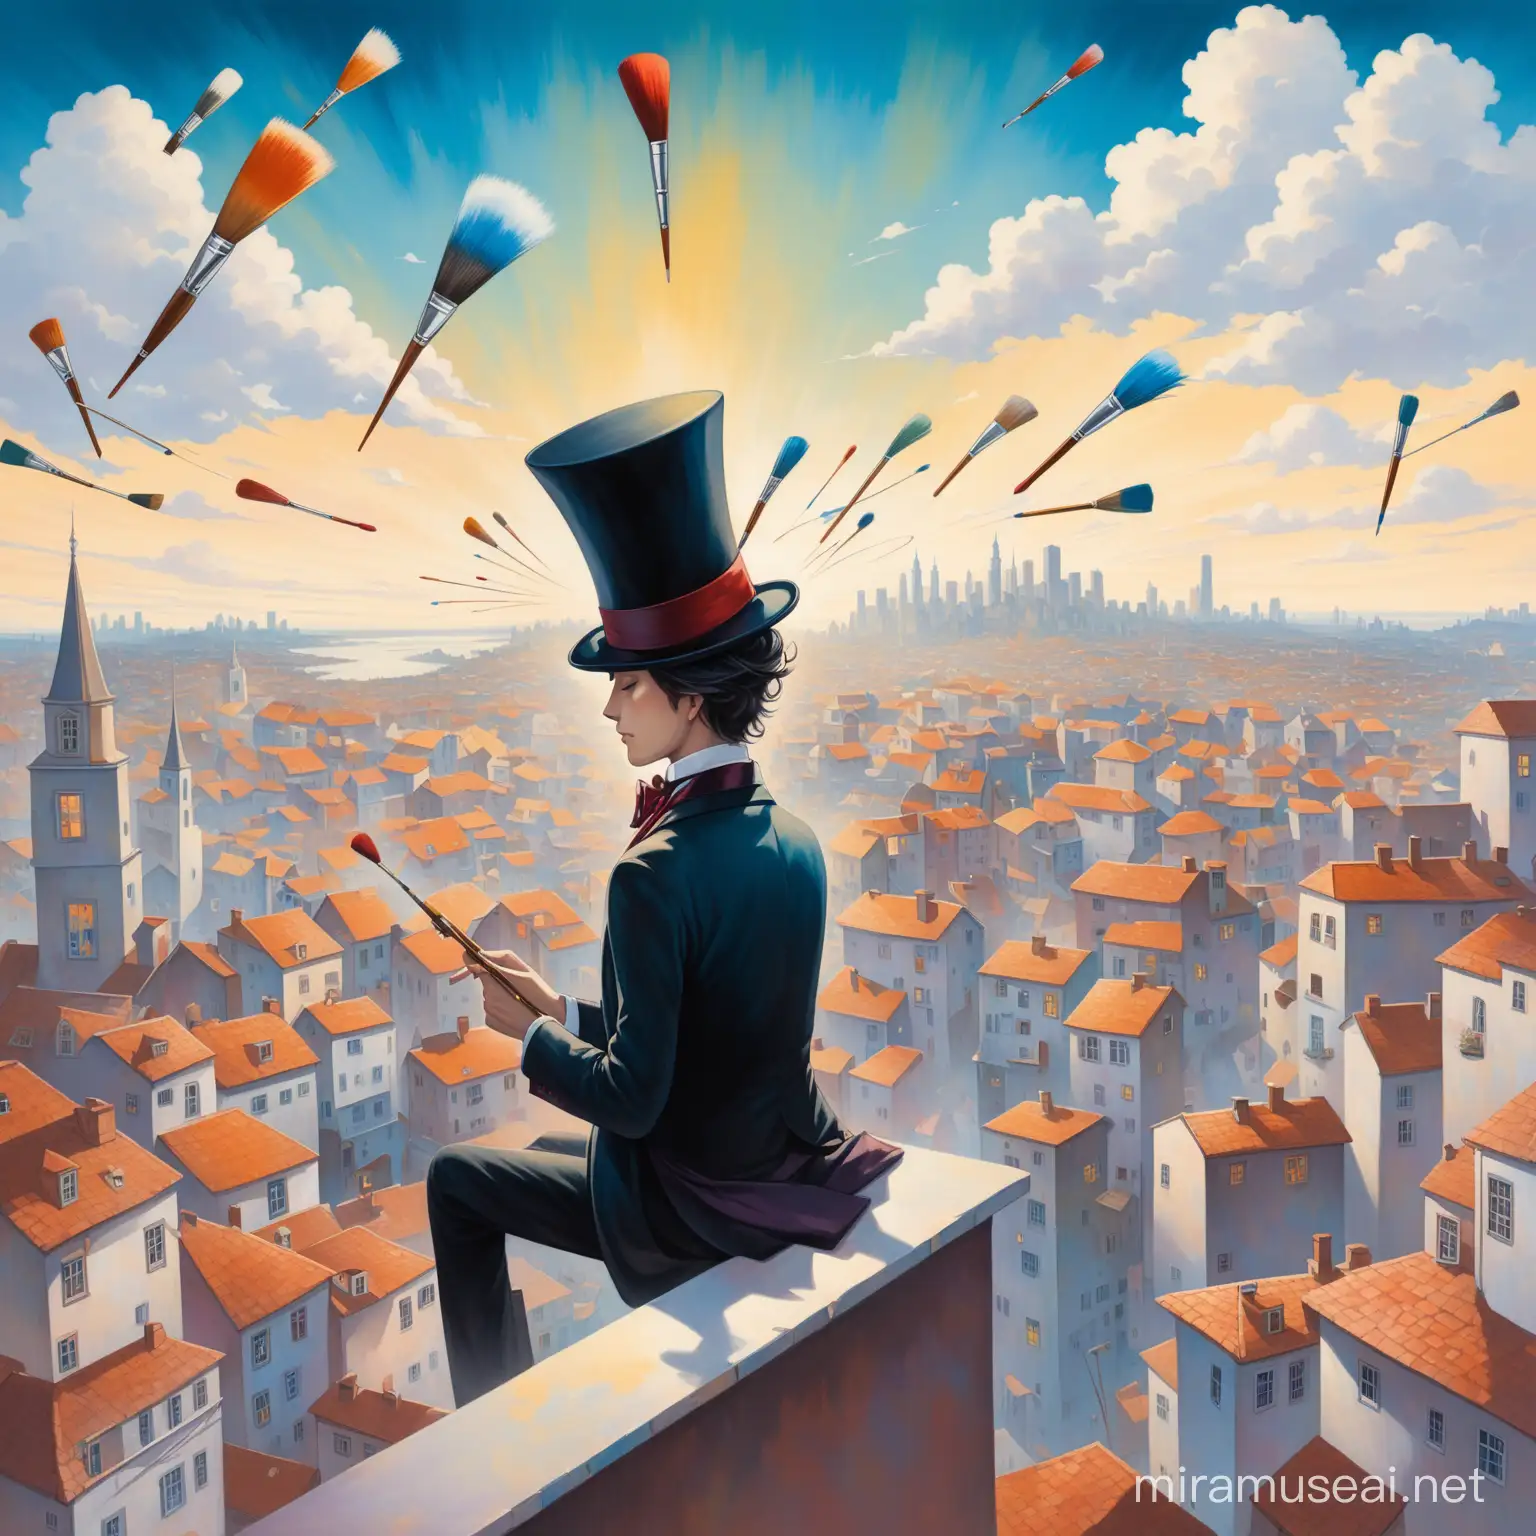 profile picture - surreal painting closeup of an artist with a top hat flying over a city with paintbrushes floating around. 